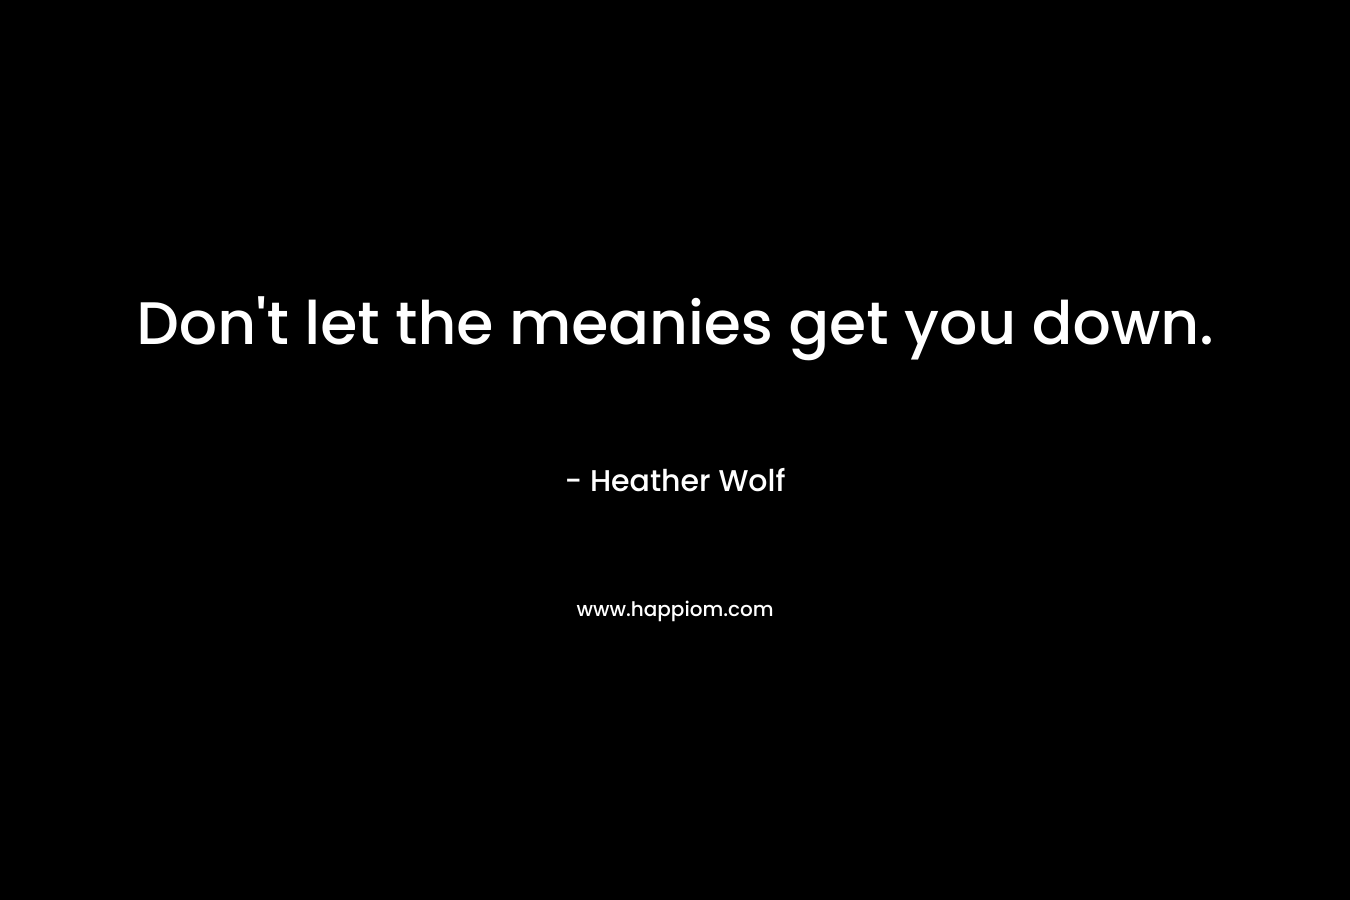 Don’t let the meanies get you down. – Heather Wolf